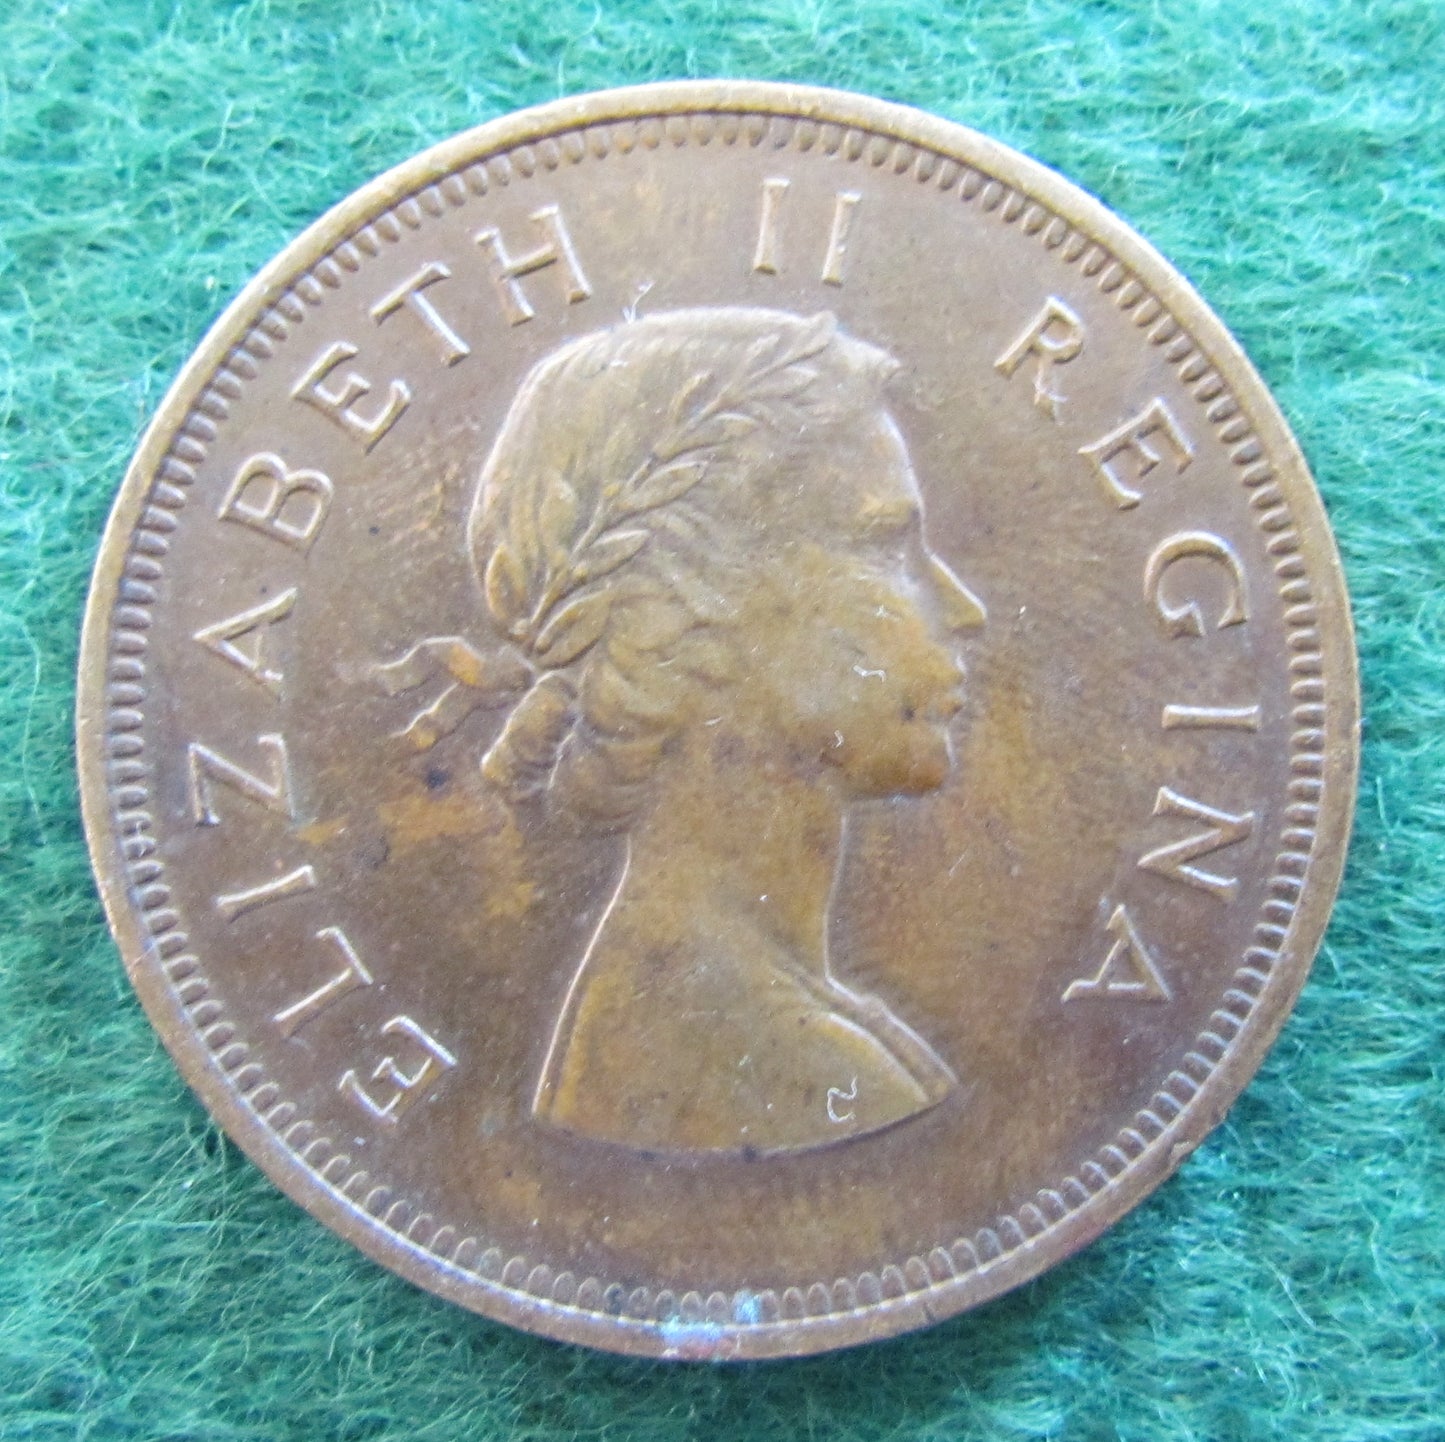 South Africa 1955 1 Penny Coin